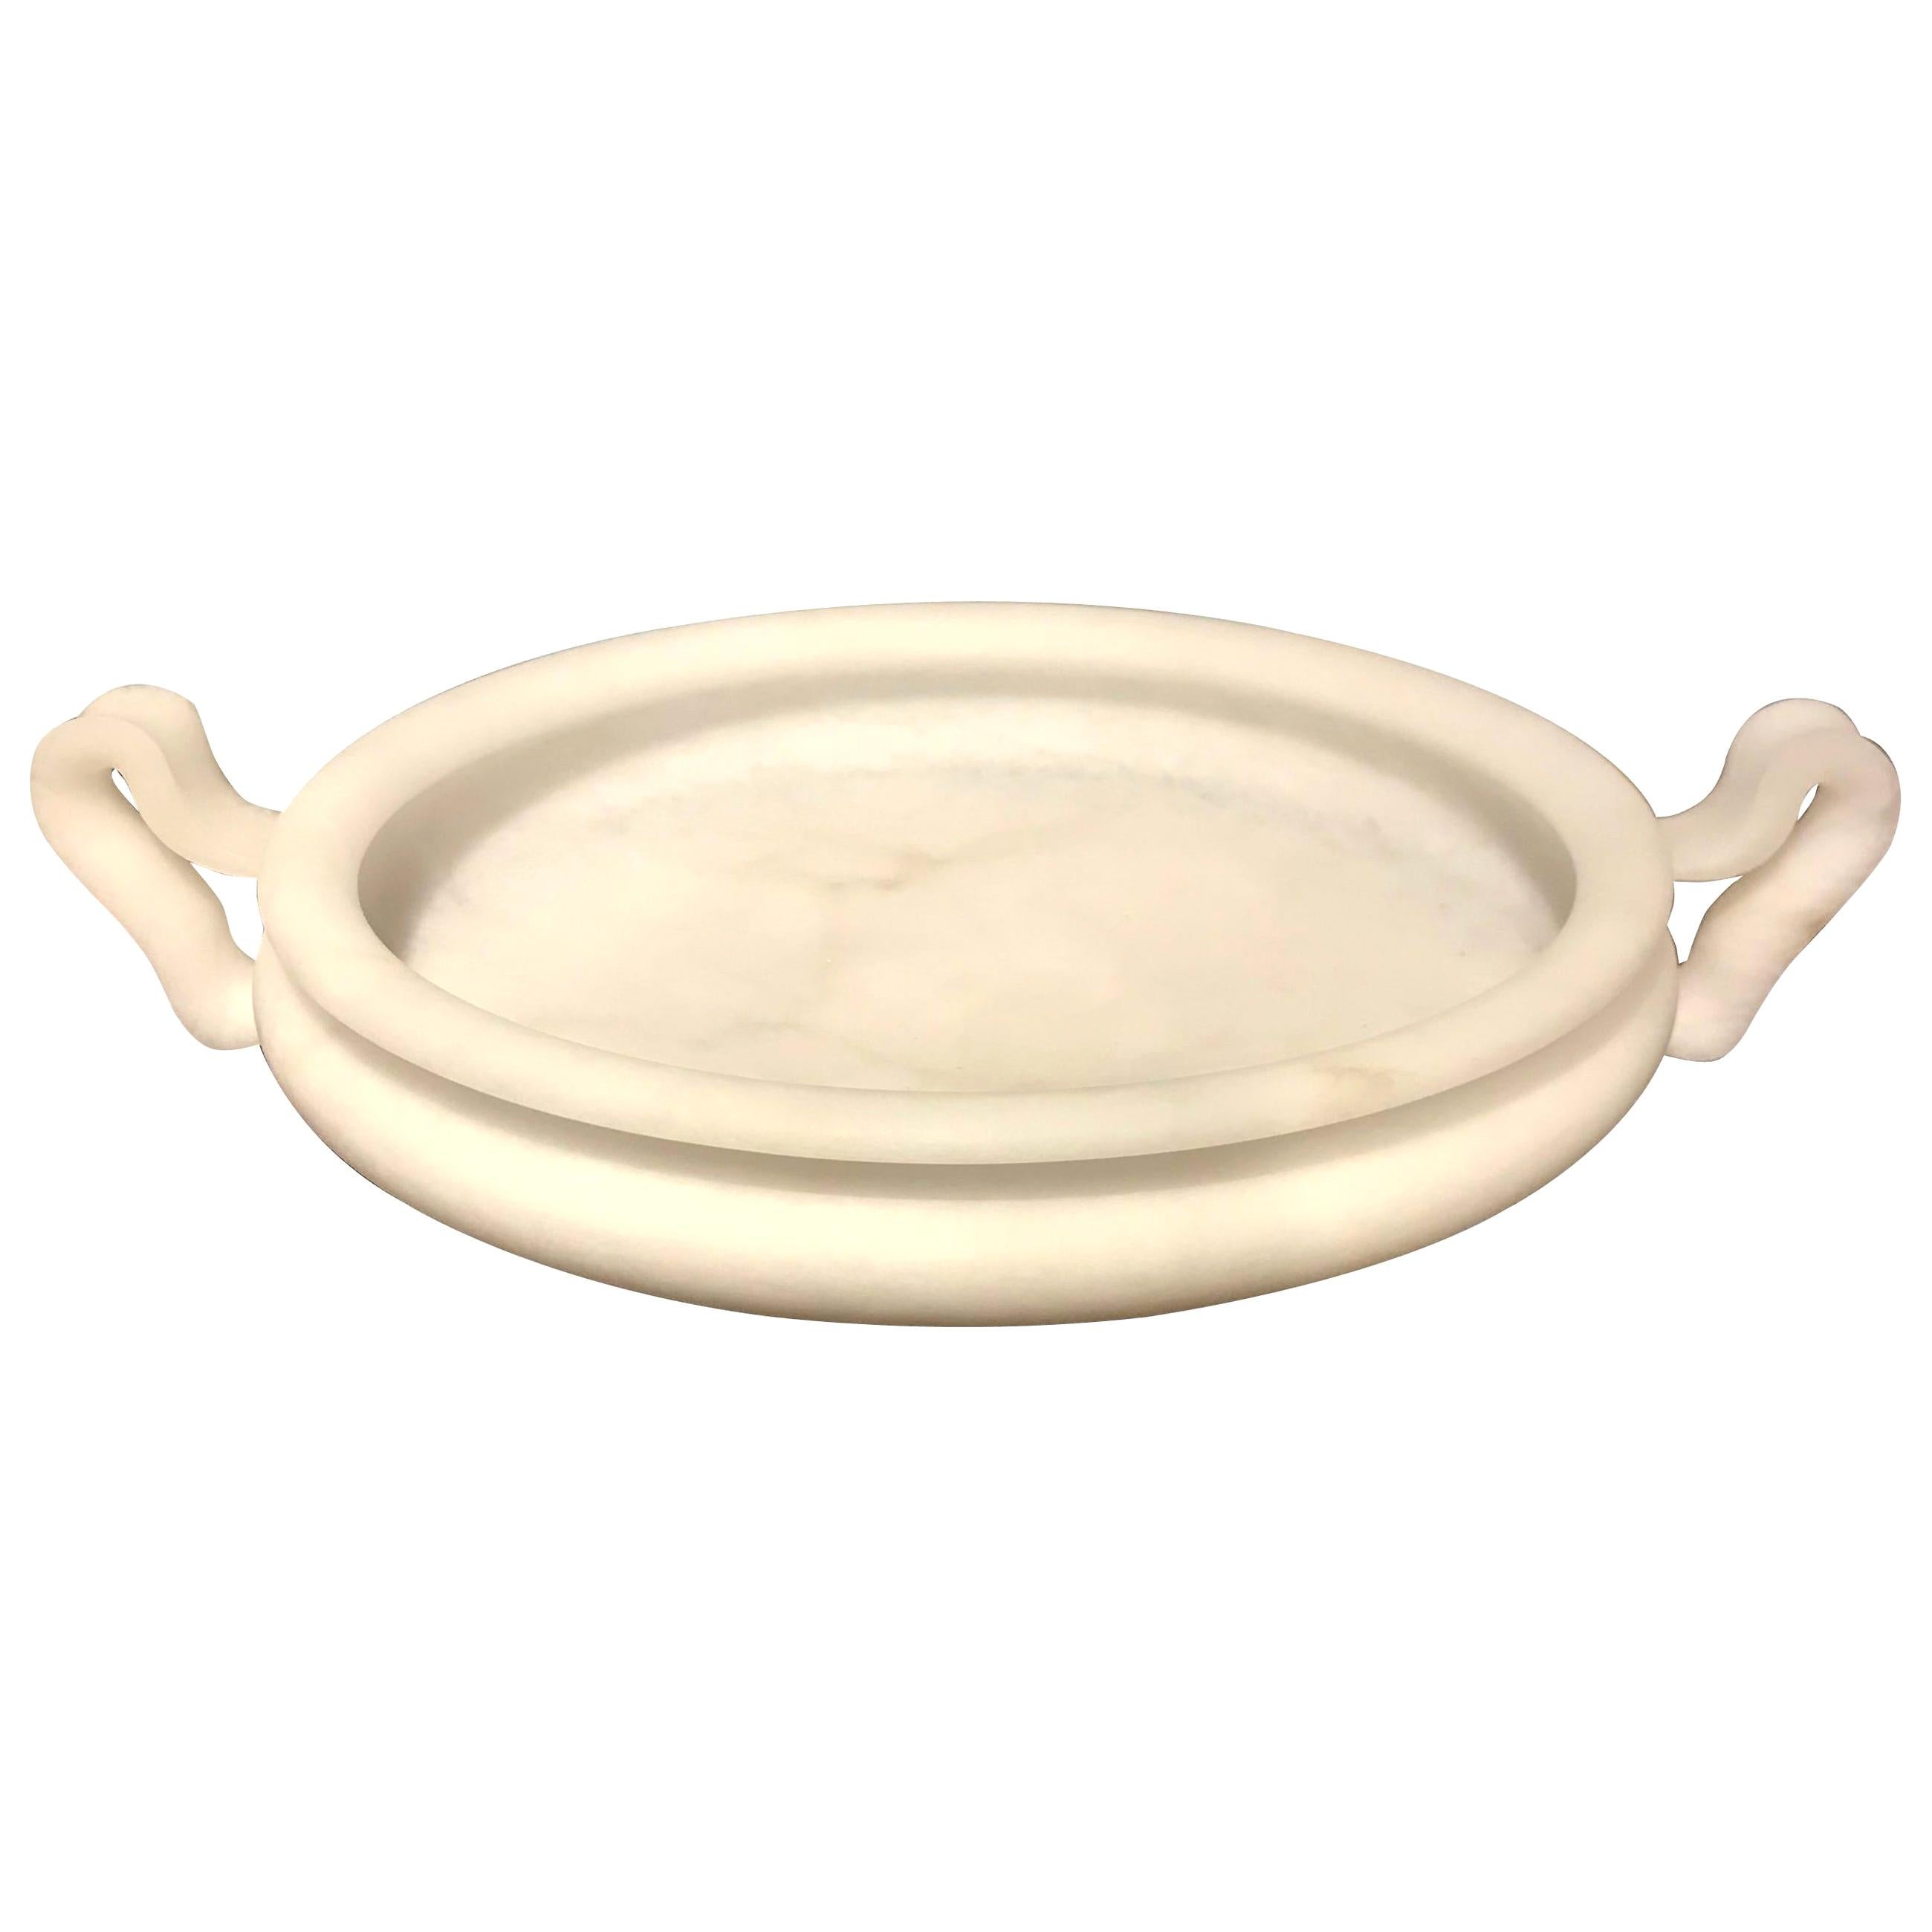 Cream Alabaster Round Bowl with Handles, Italy, Contemporary